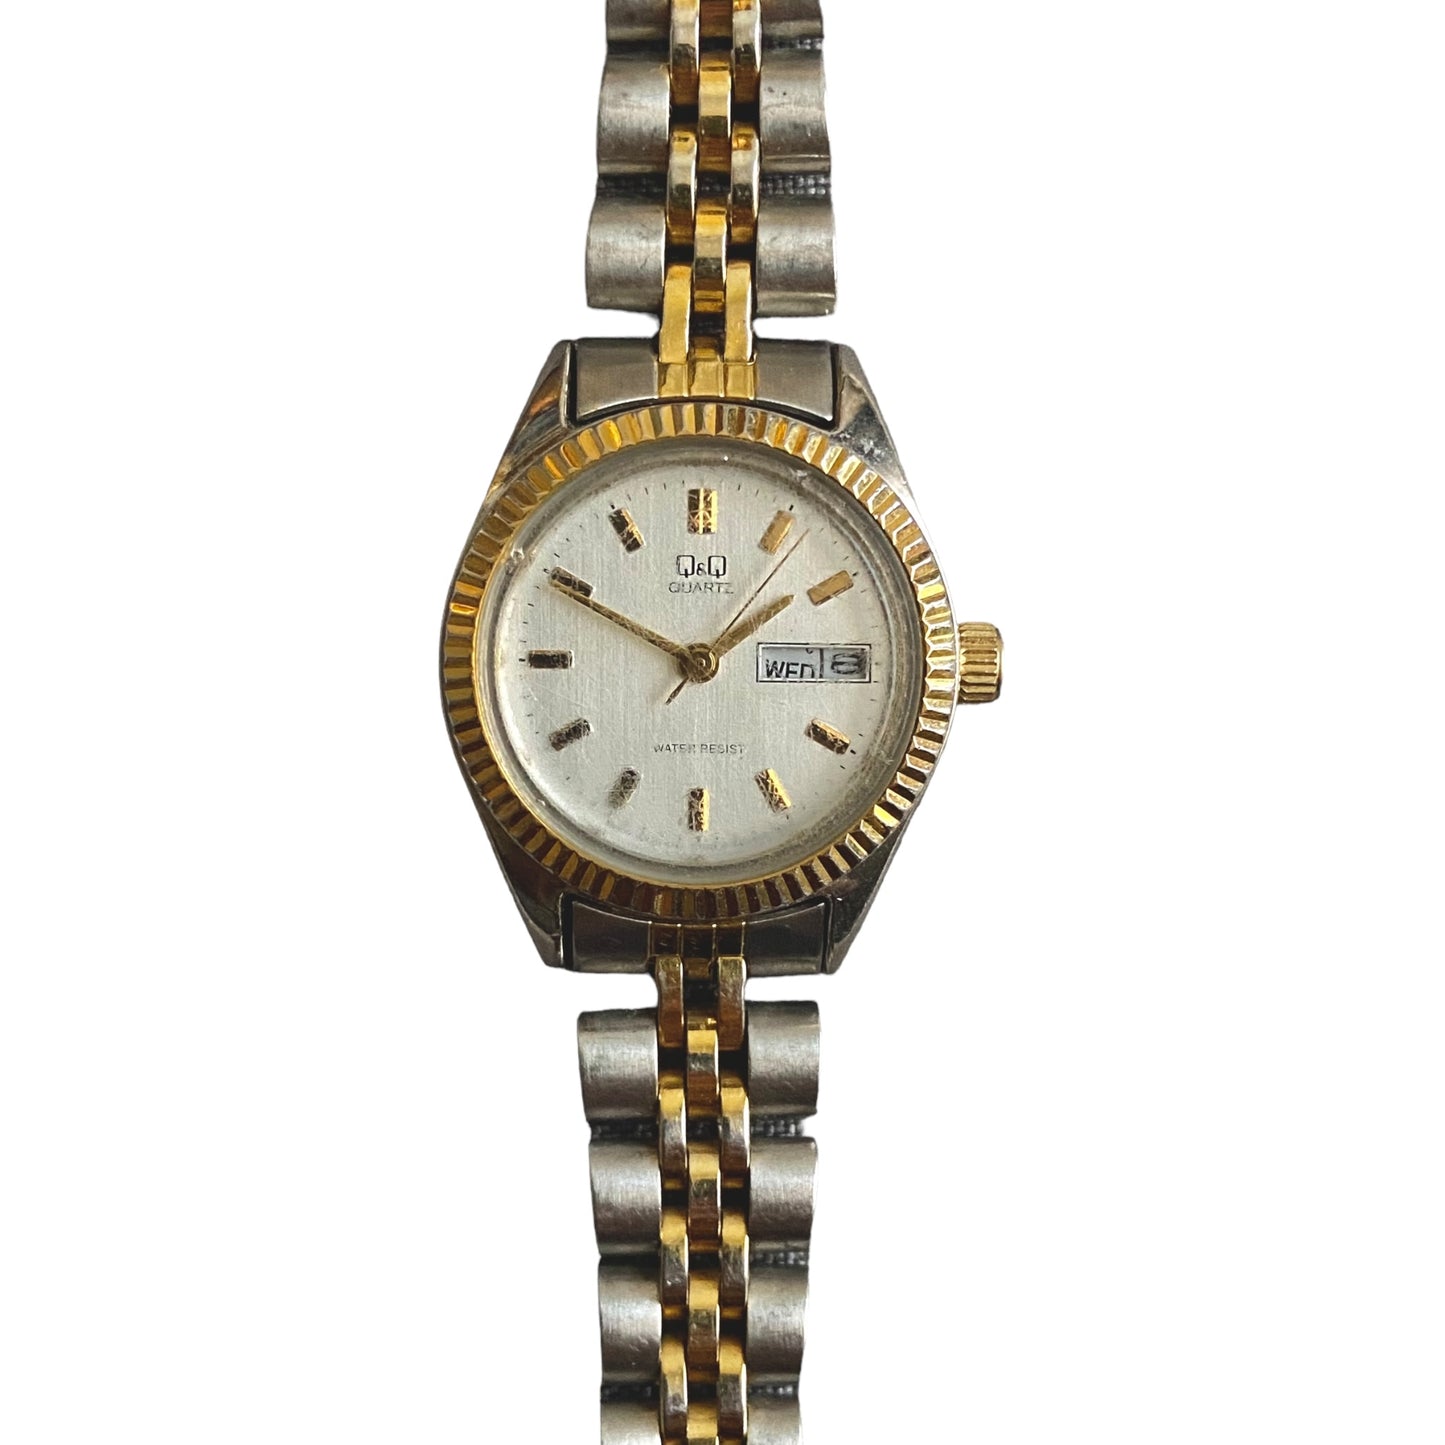 One-of-one | Q&Q quartz water resistant gold & silver Watch